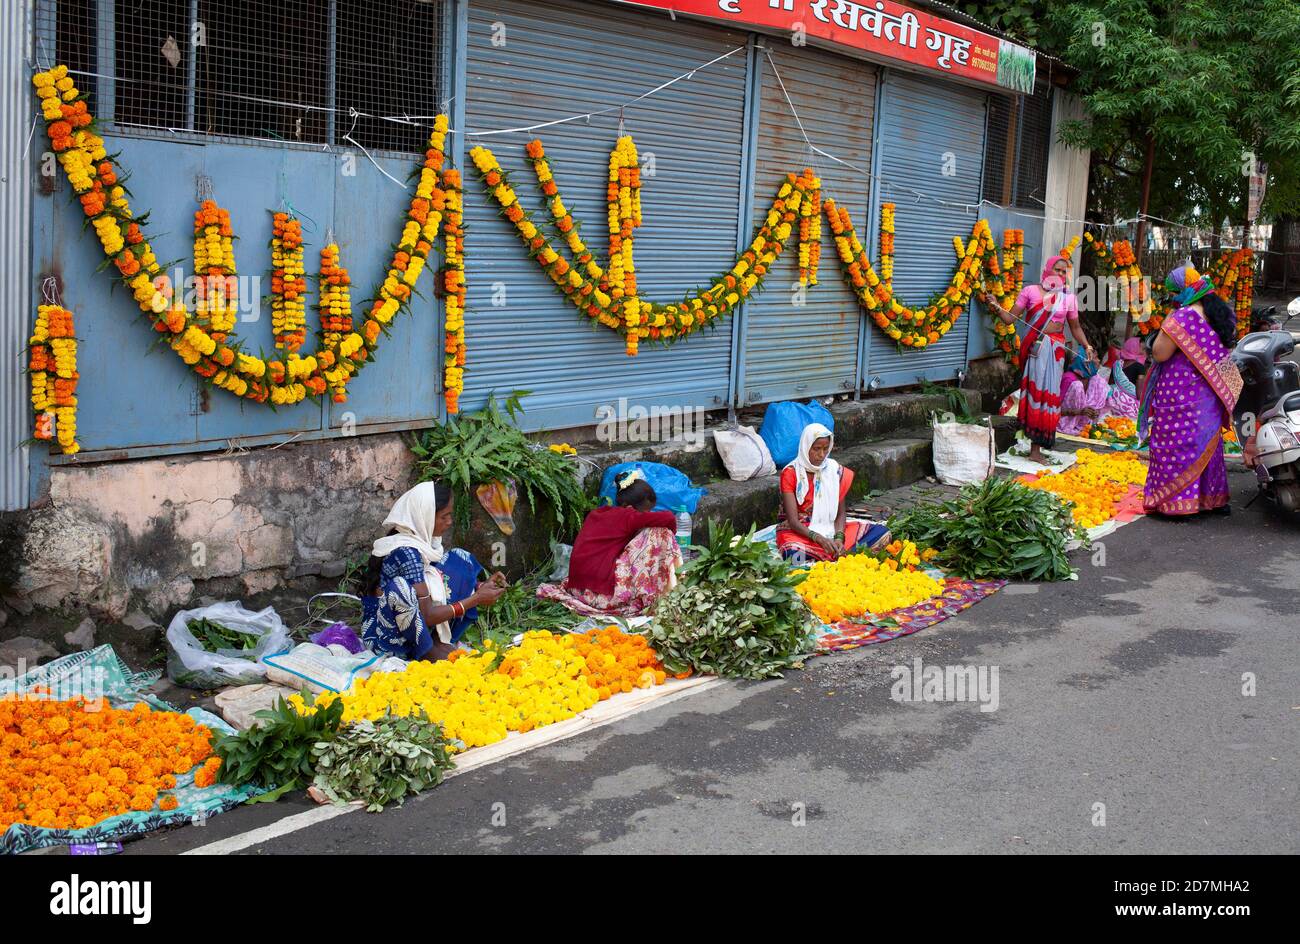 Women selling marigold flowers and garlands on the street on the eve of the festival of Dasara Location: Maharashtra, India Date: October 24 2020 Stock Photo